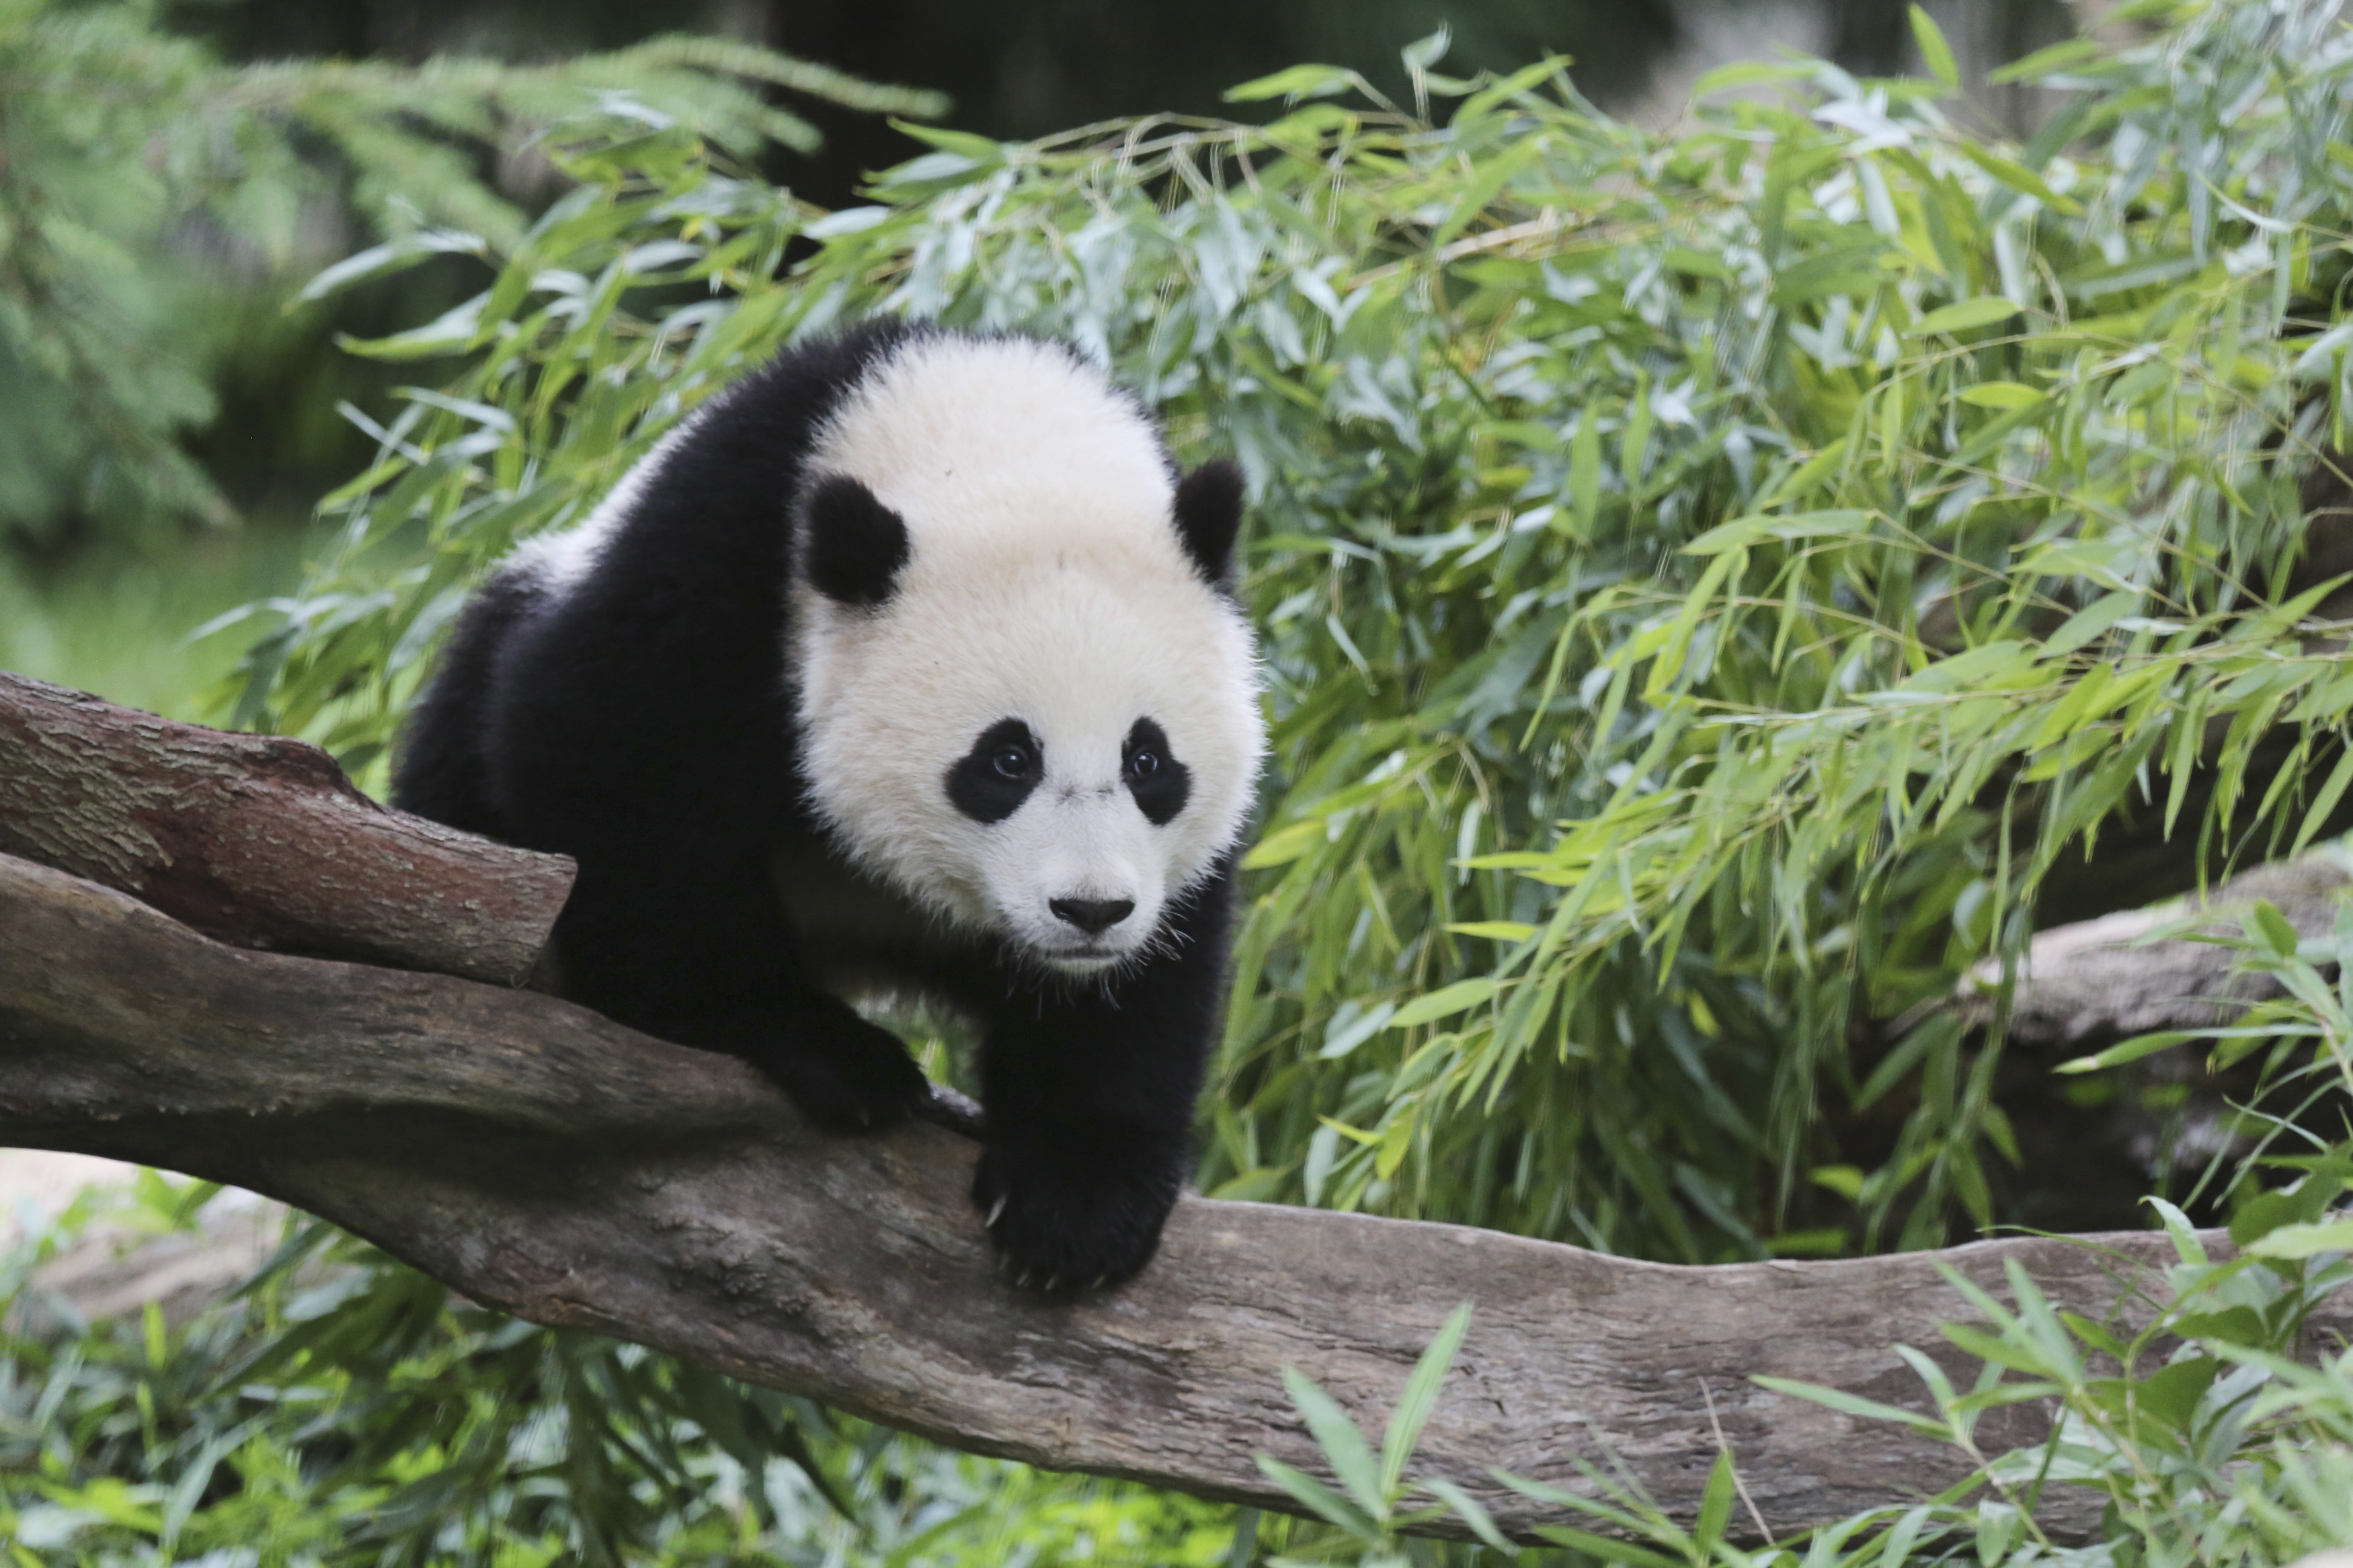 Bao Bao, a 44-pound female panda bear cub, is seen in the panda exhibit at the Smithsonian's National Zoo in Washington August 23, 2014. (Reuters)